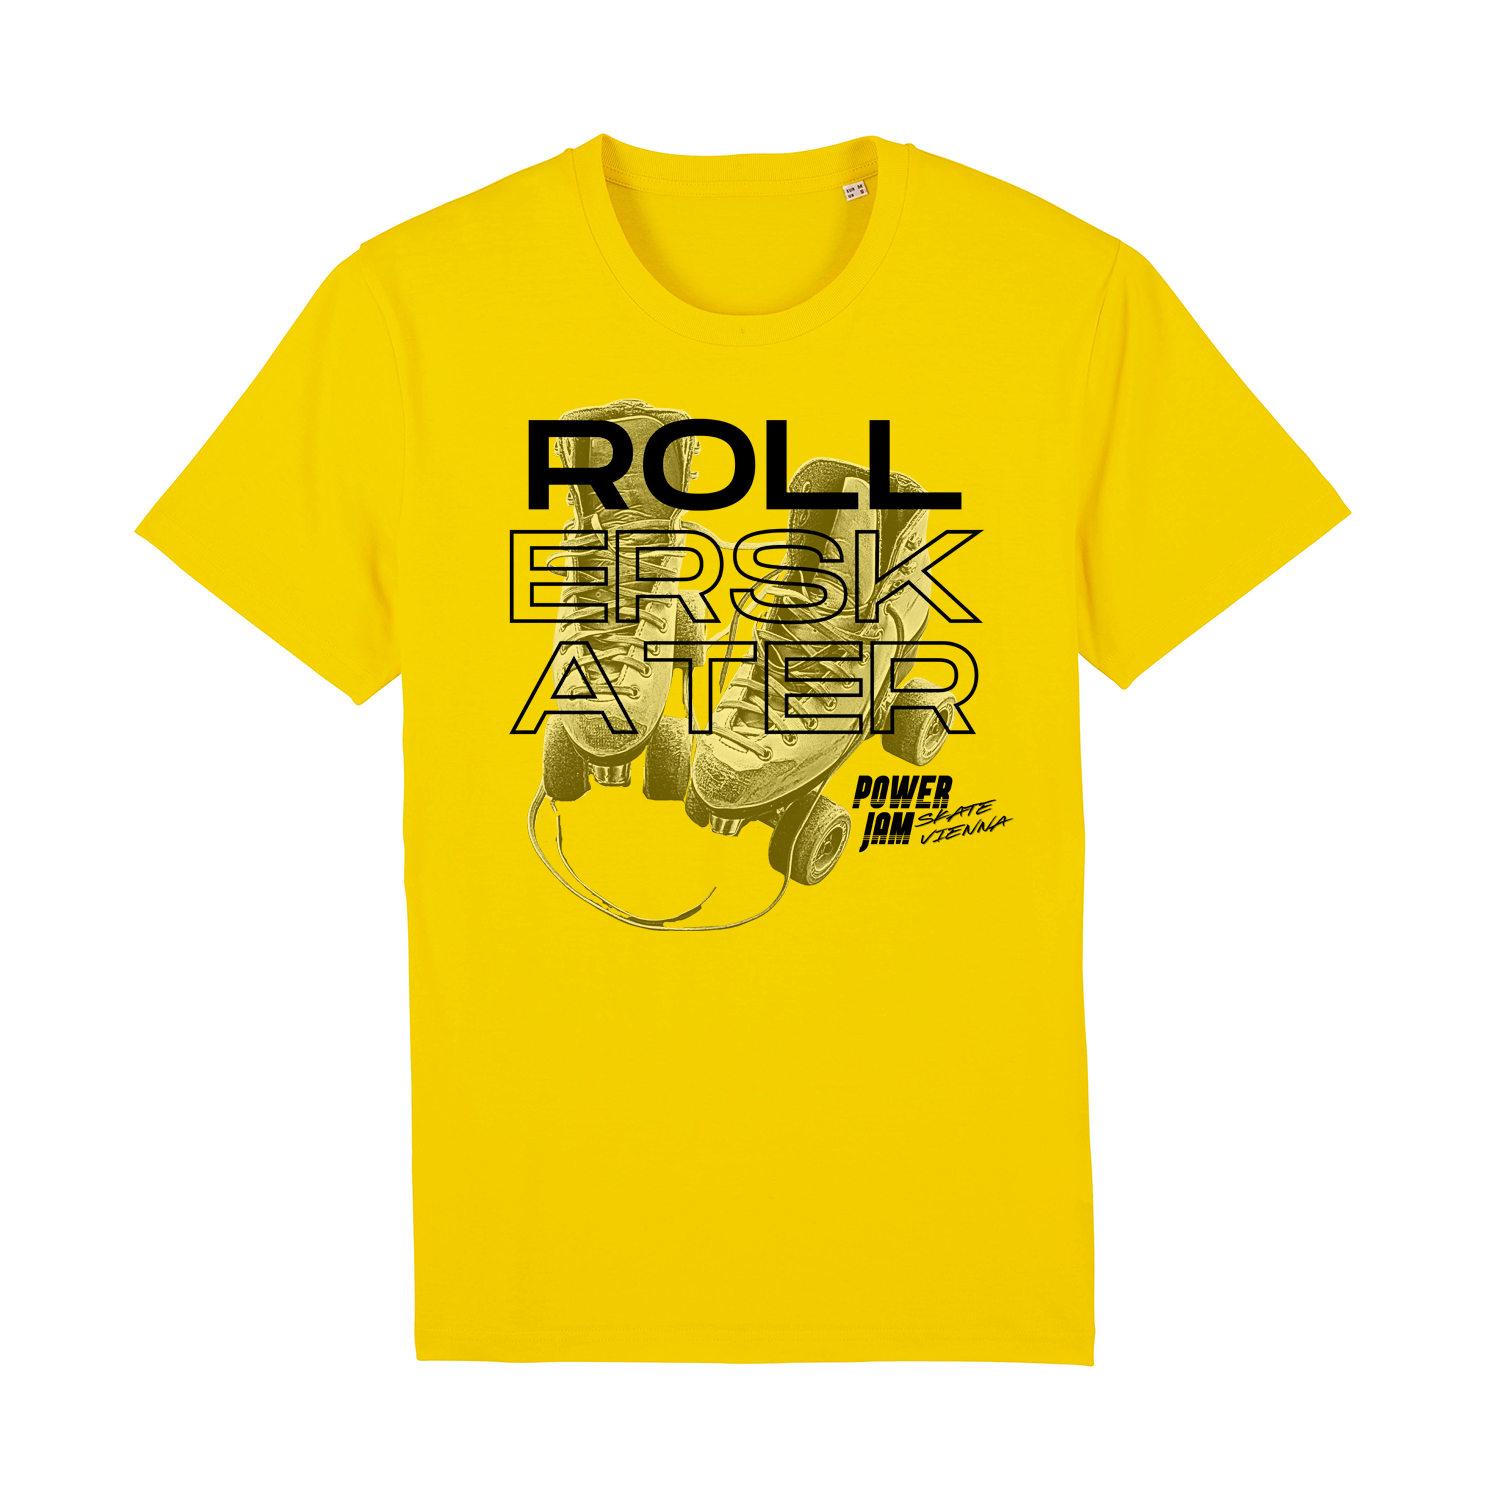 Featured image for “Powerjam Shirts – Rollerskater”